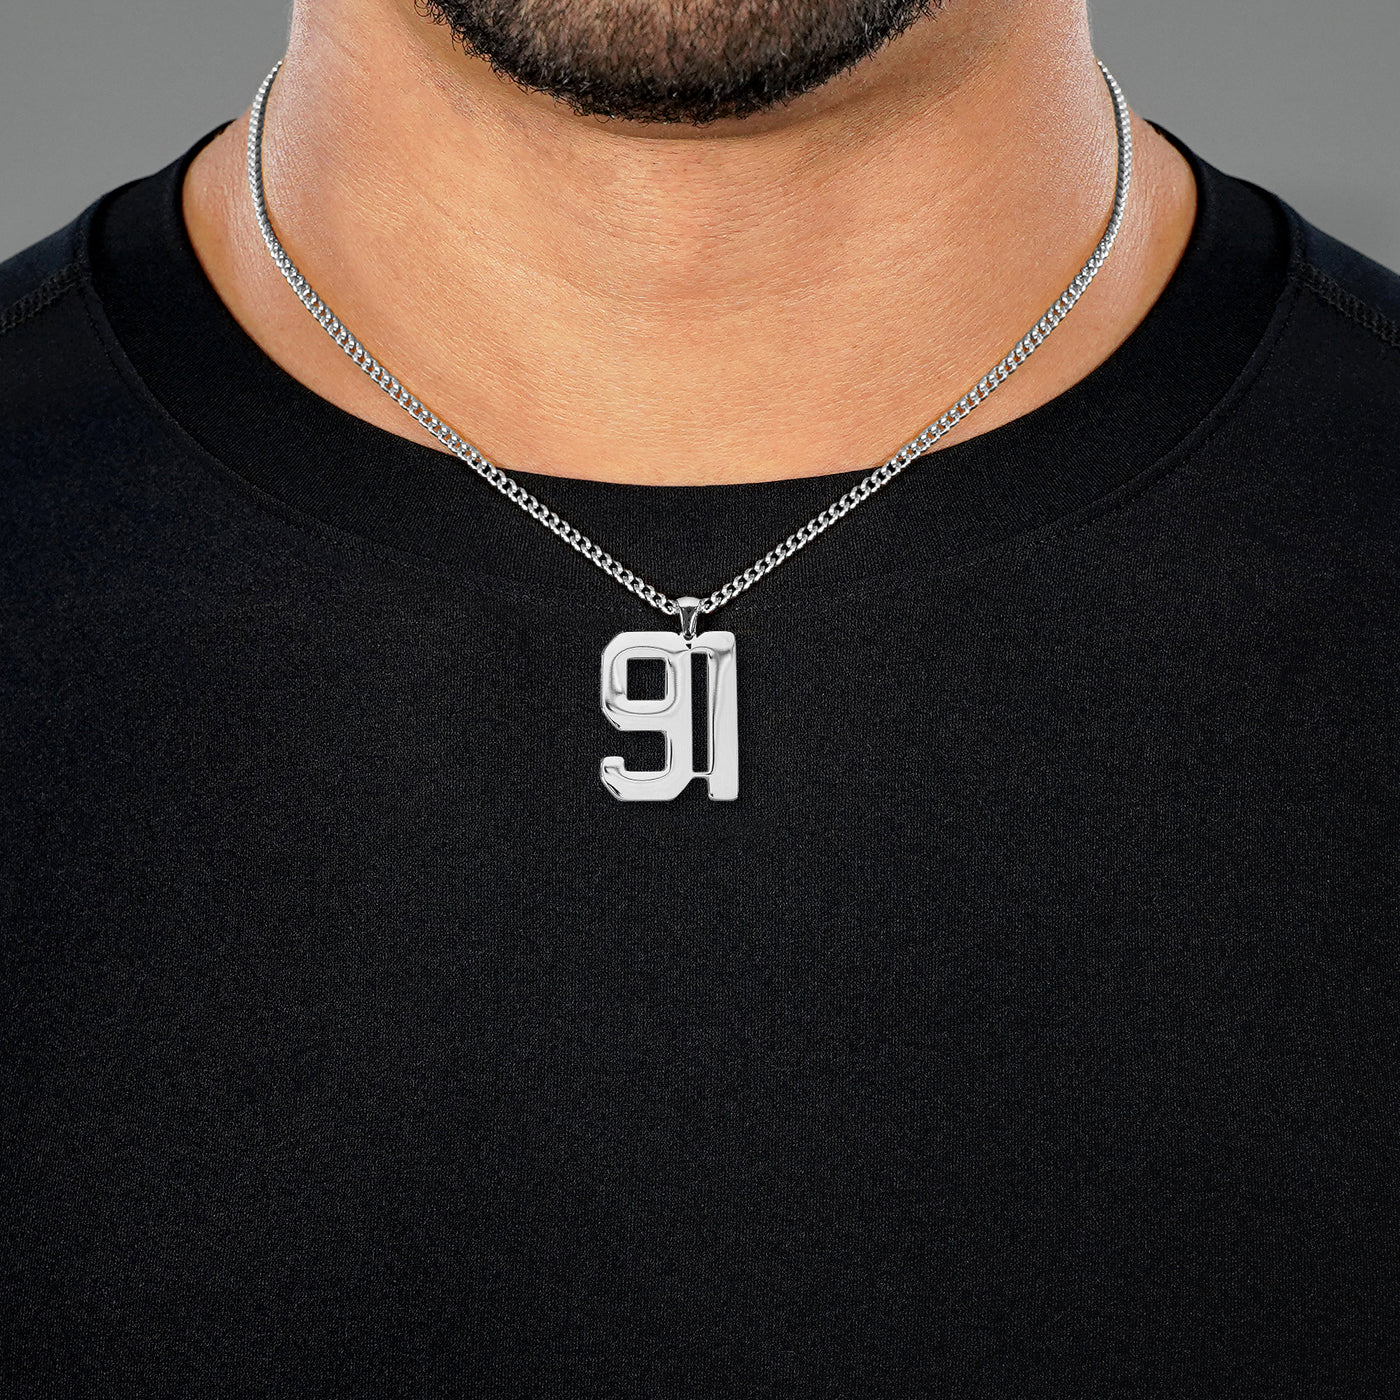 91 Number Pendant with Chain Necklace - Stainless Steel